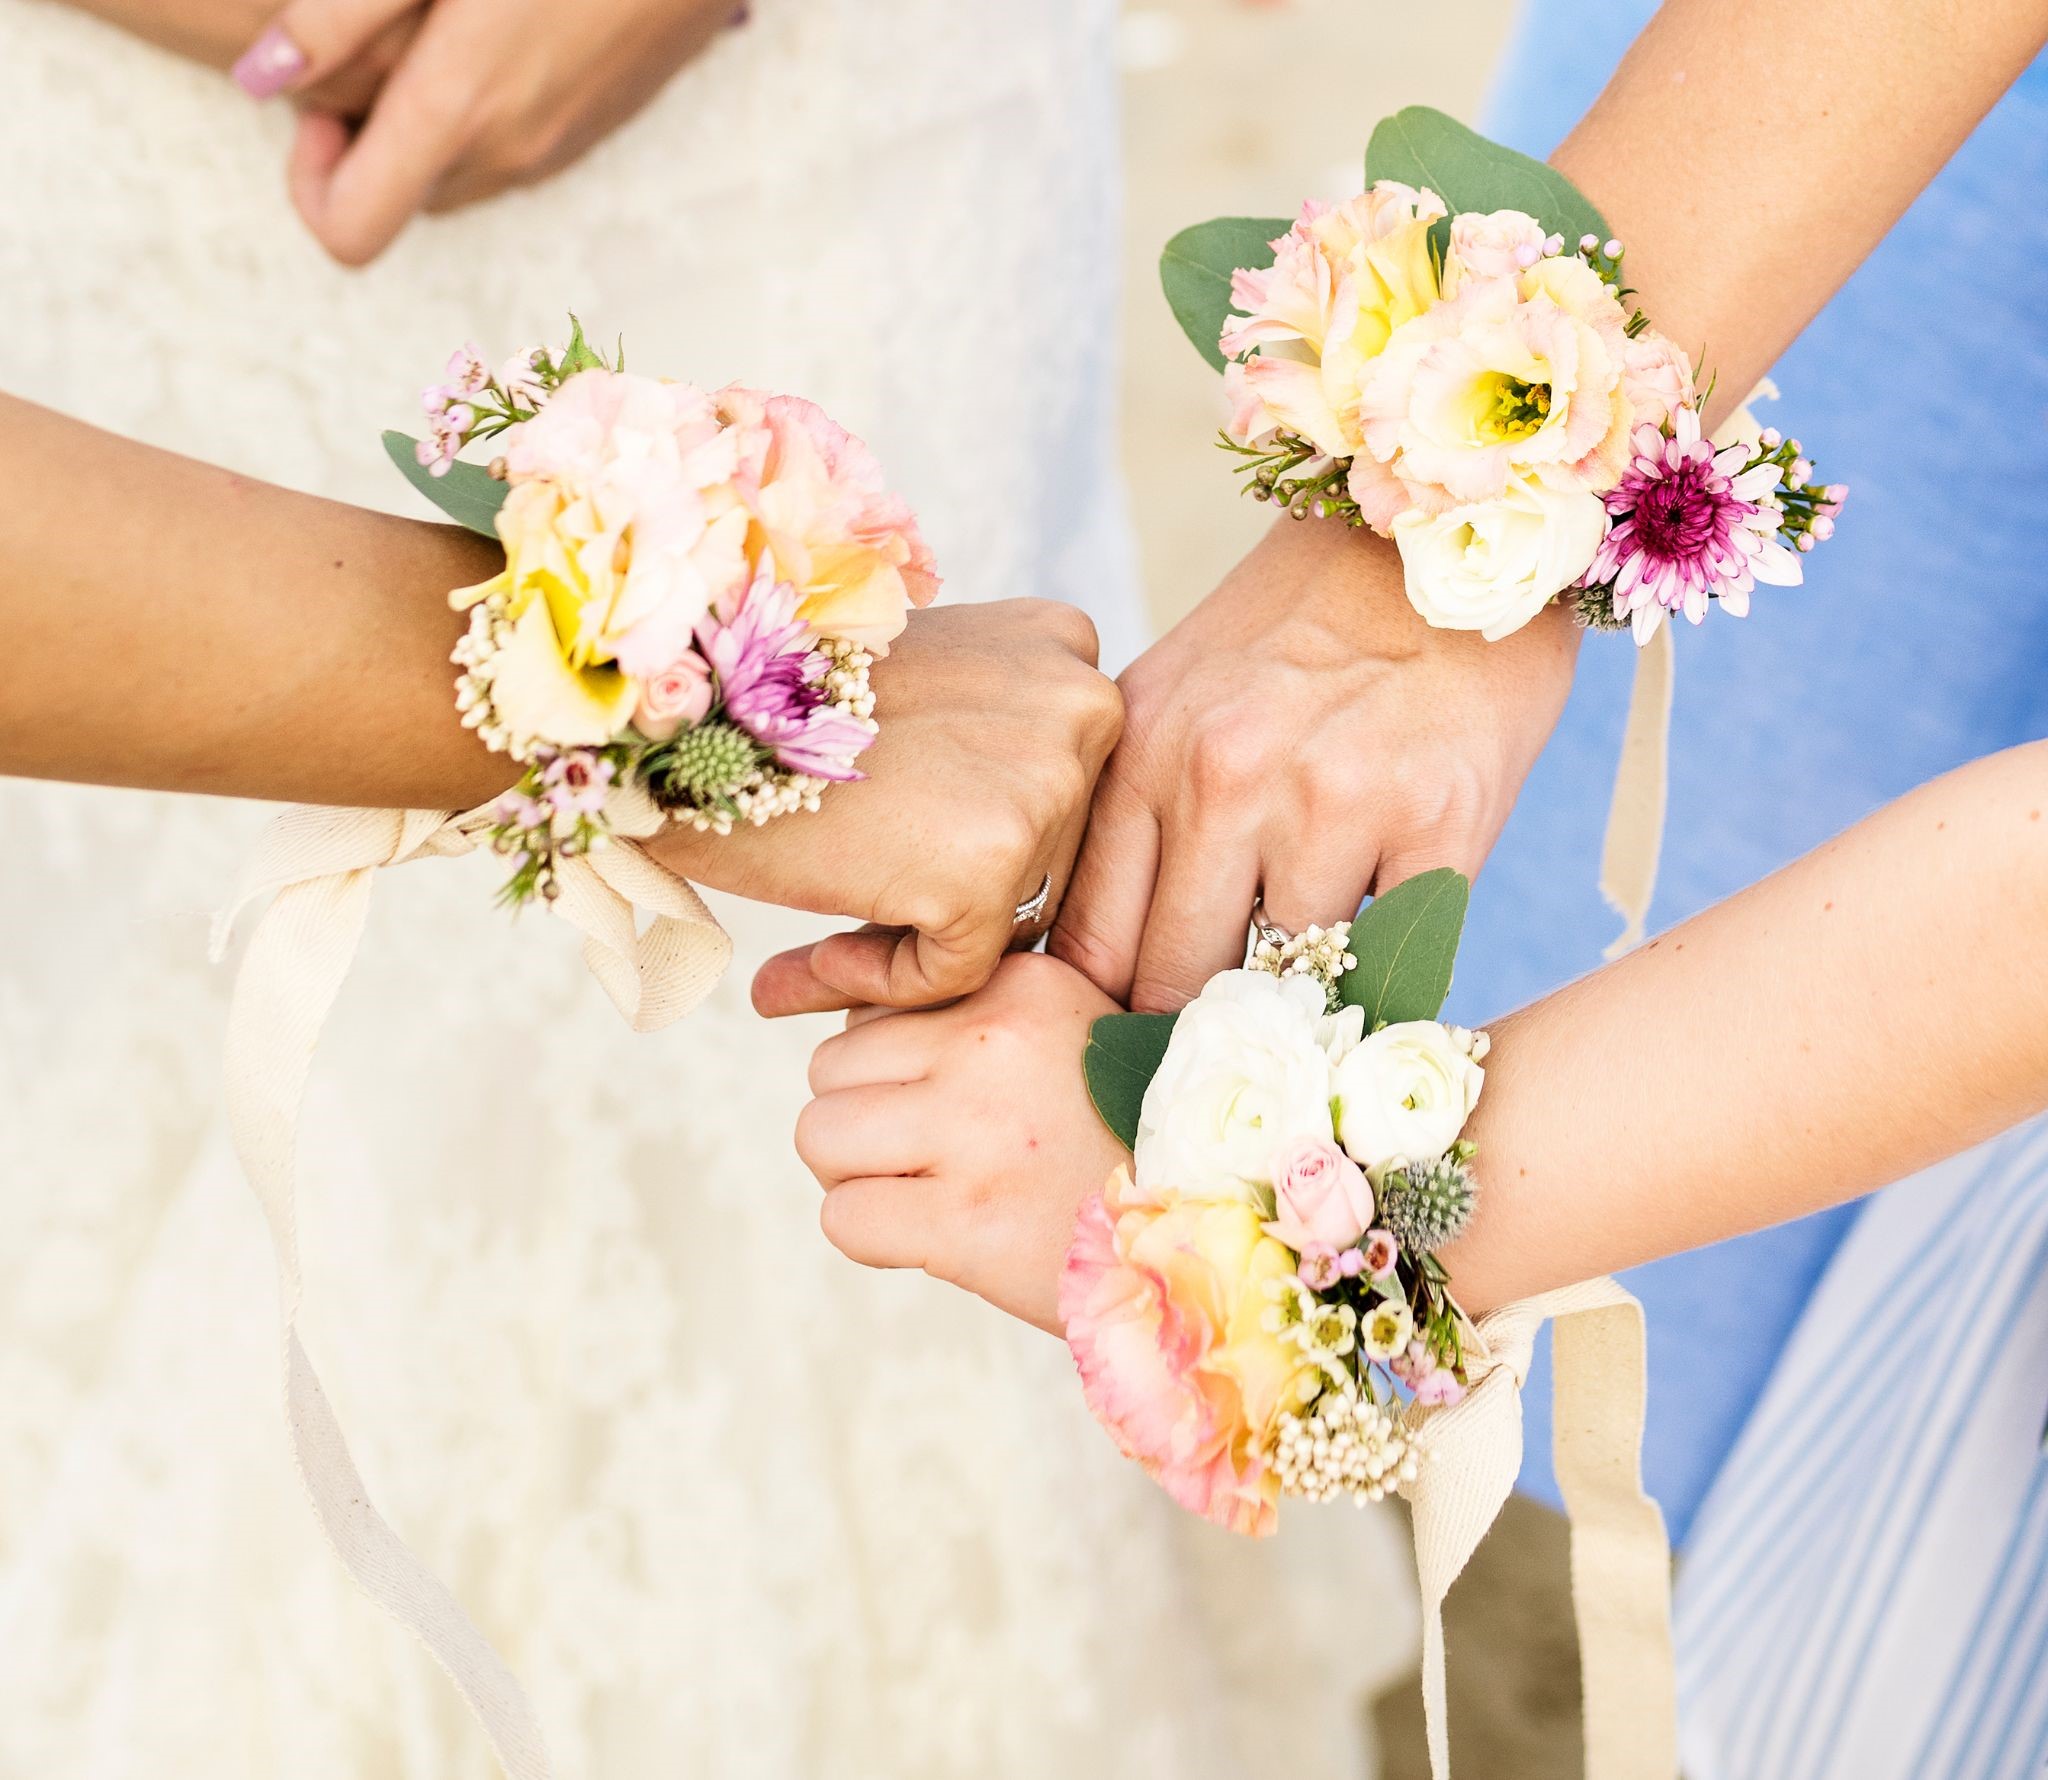 Are Wedding Corsages Still in Trend?